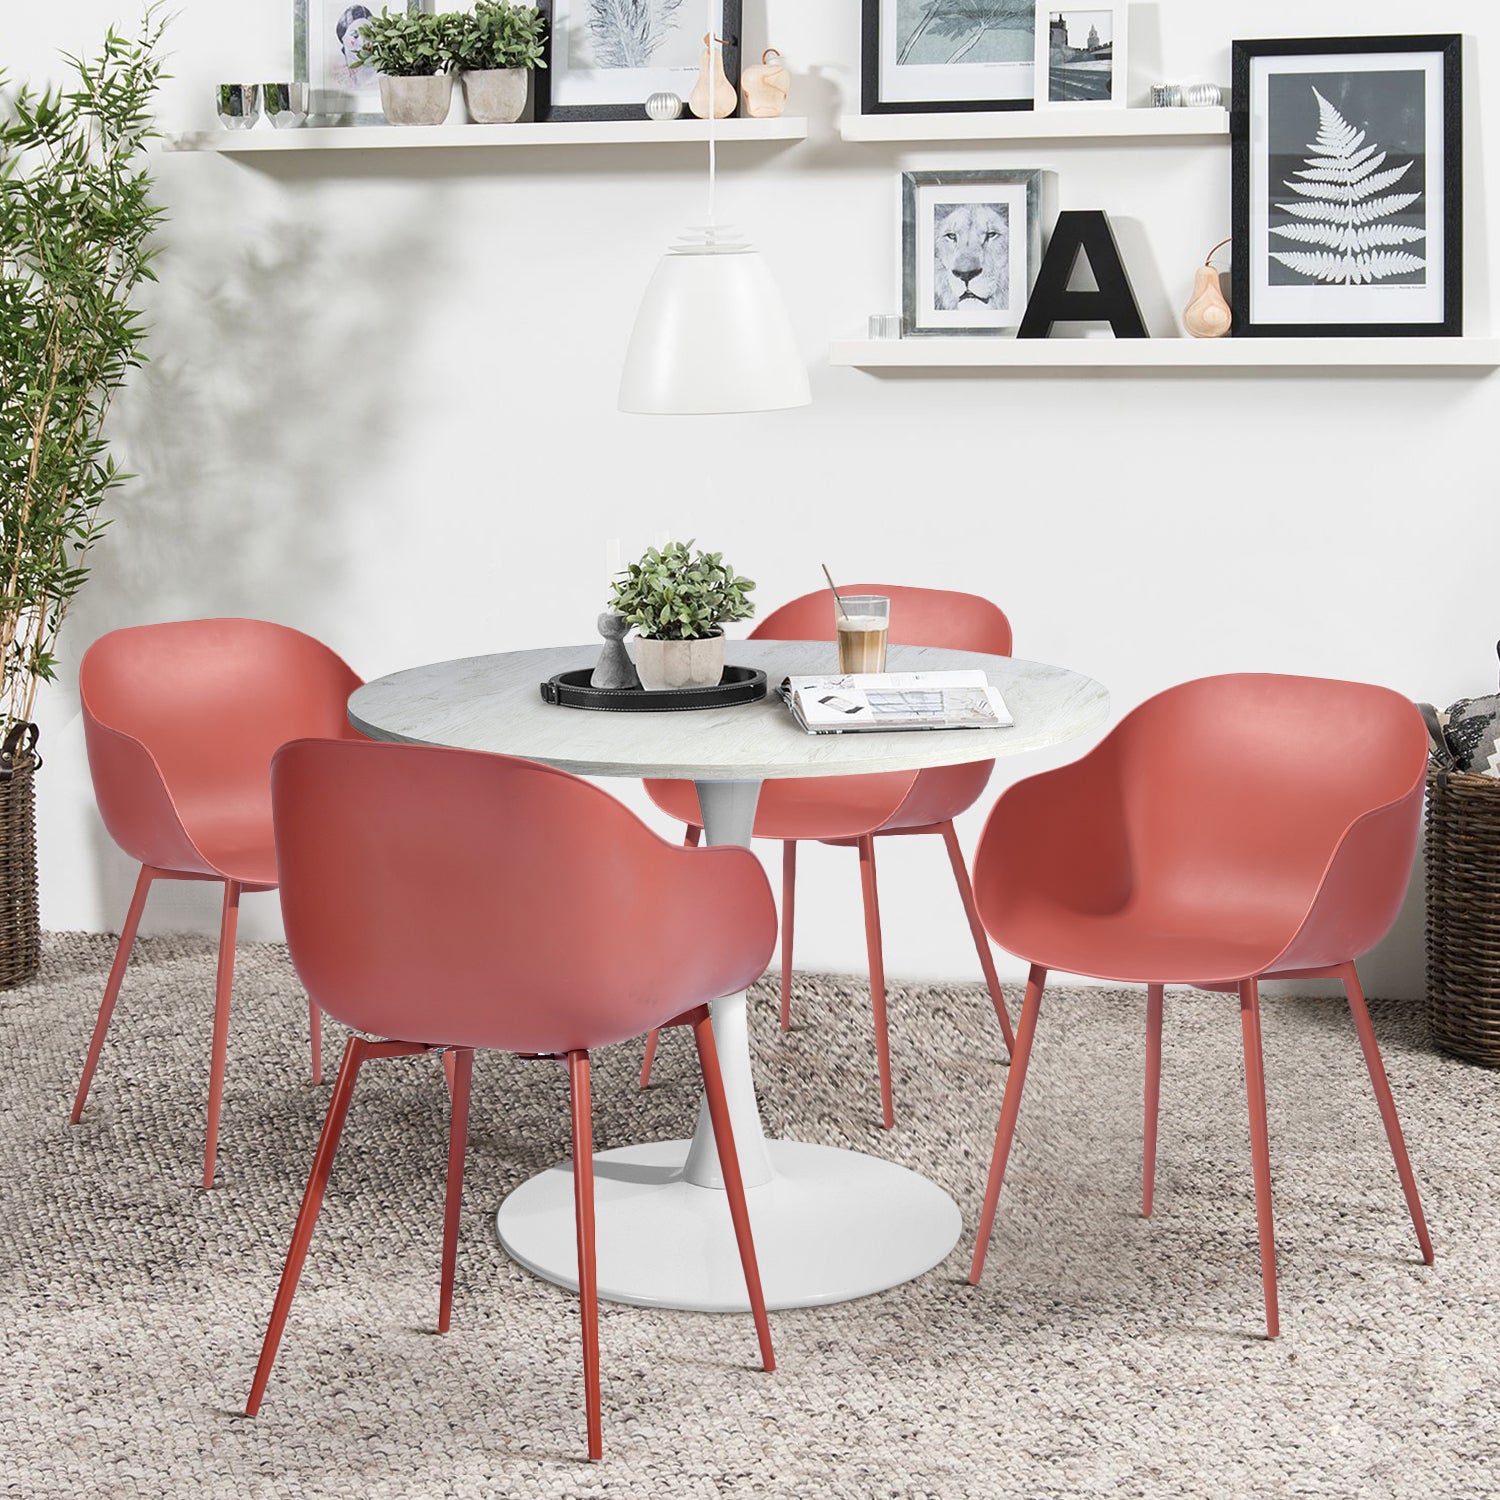 Set of 4 Scandinavian design chairs in red plastic dining room, metal legs in red paint, ergonomic chair - ARANA RED